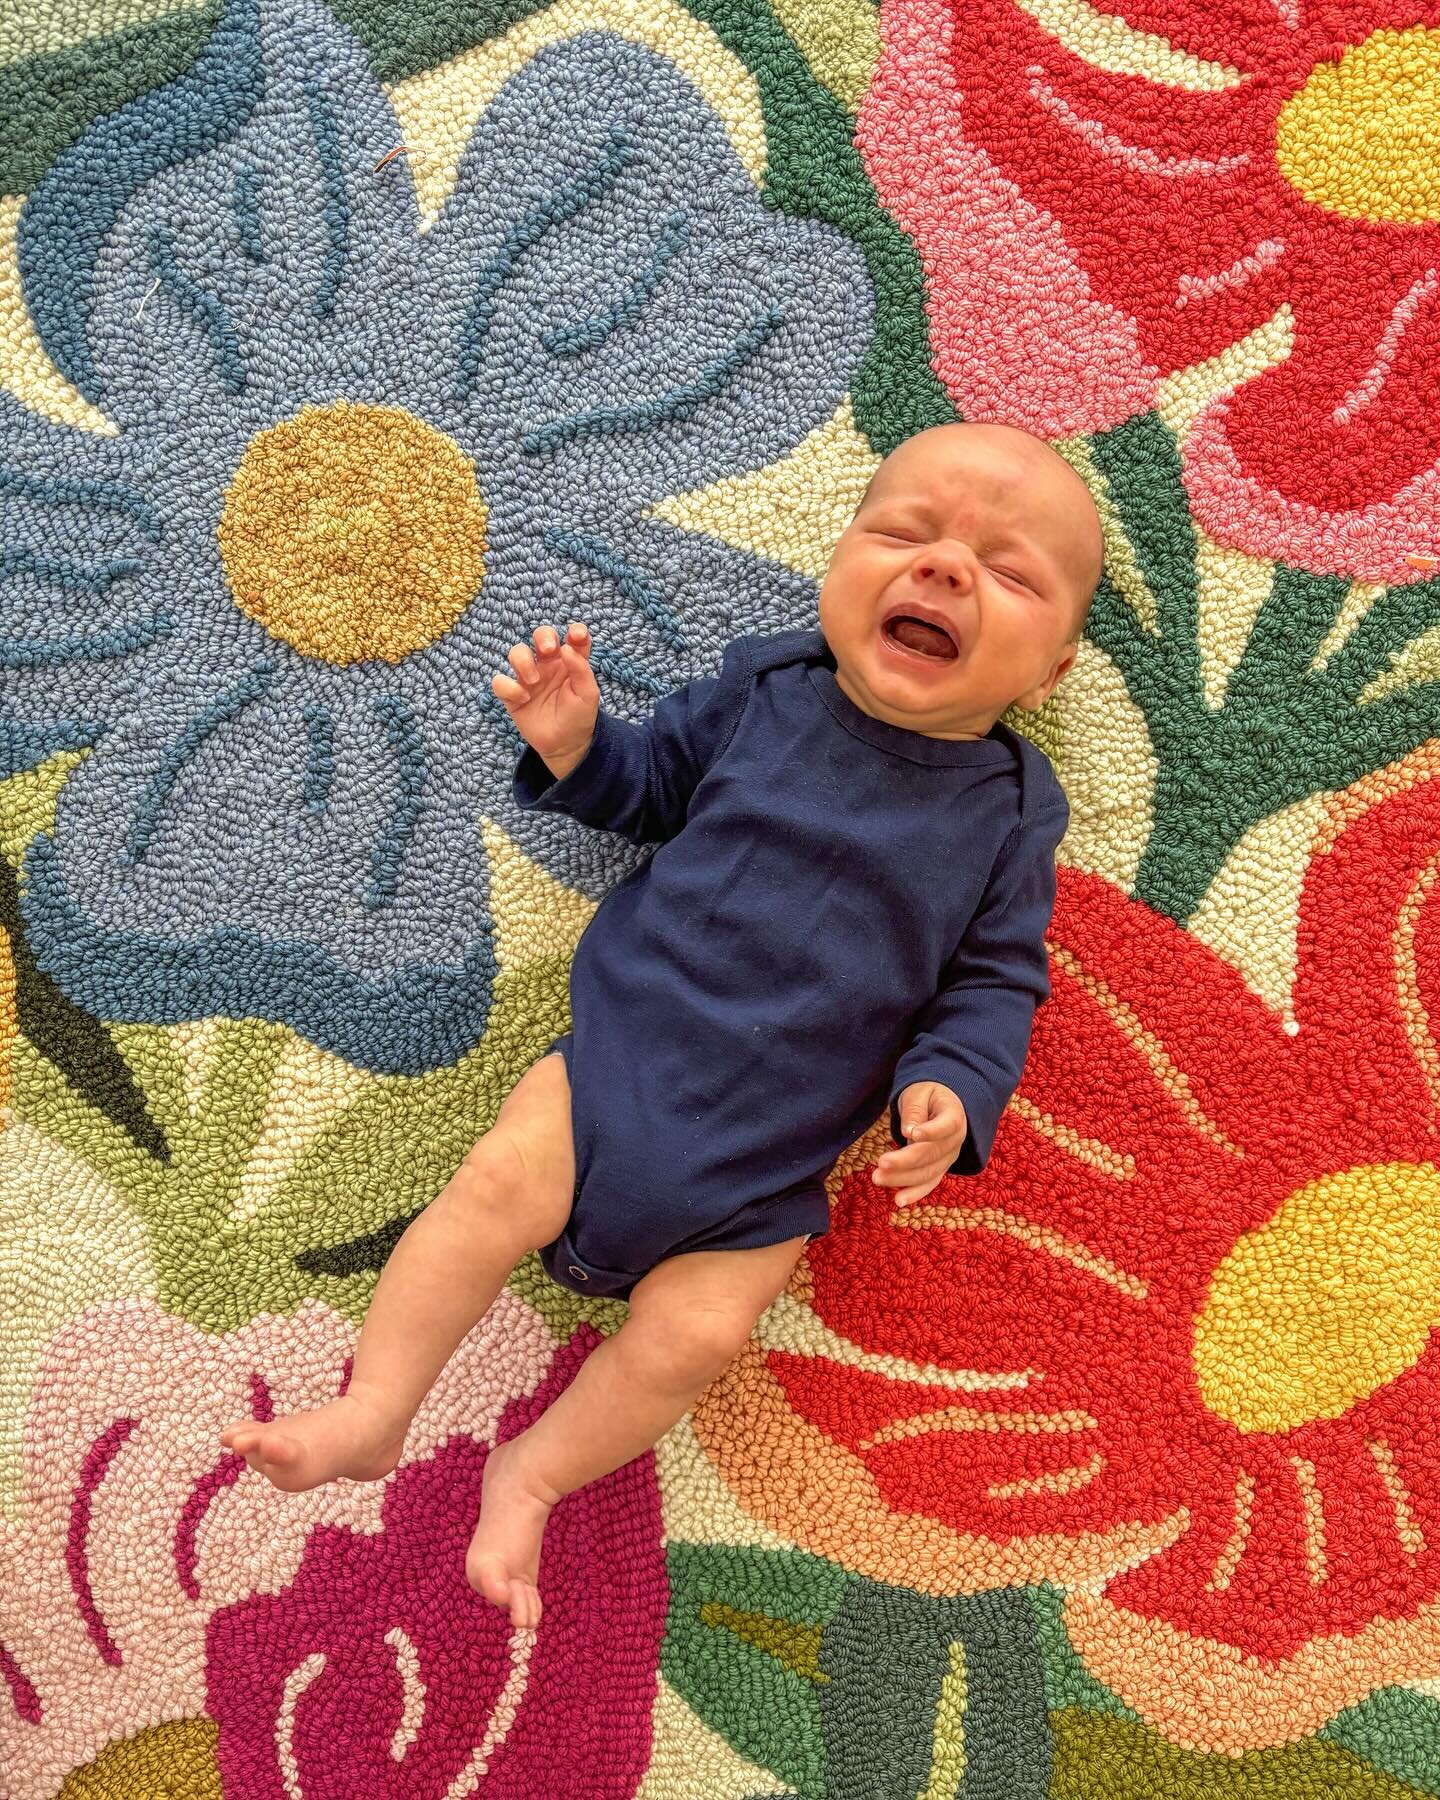 He&rsquo;s only allowed to lay on the rug if he promises not to spit on it. Or poop 💩 so far so good! 

Spring is springing here in Oklahoma! Is it spring where you are or are you still in winter? 

Also, if you want to make this rug the course is l